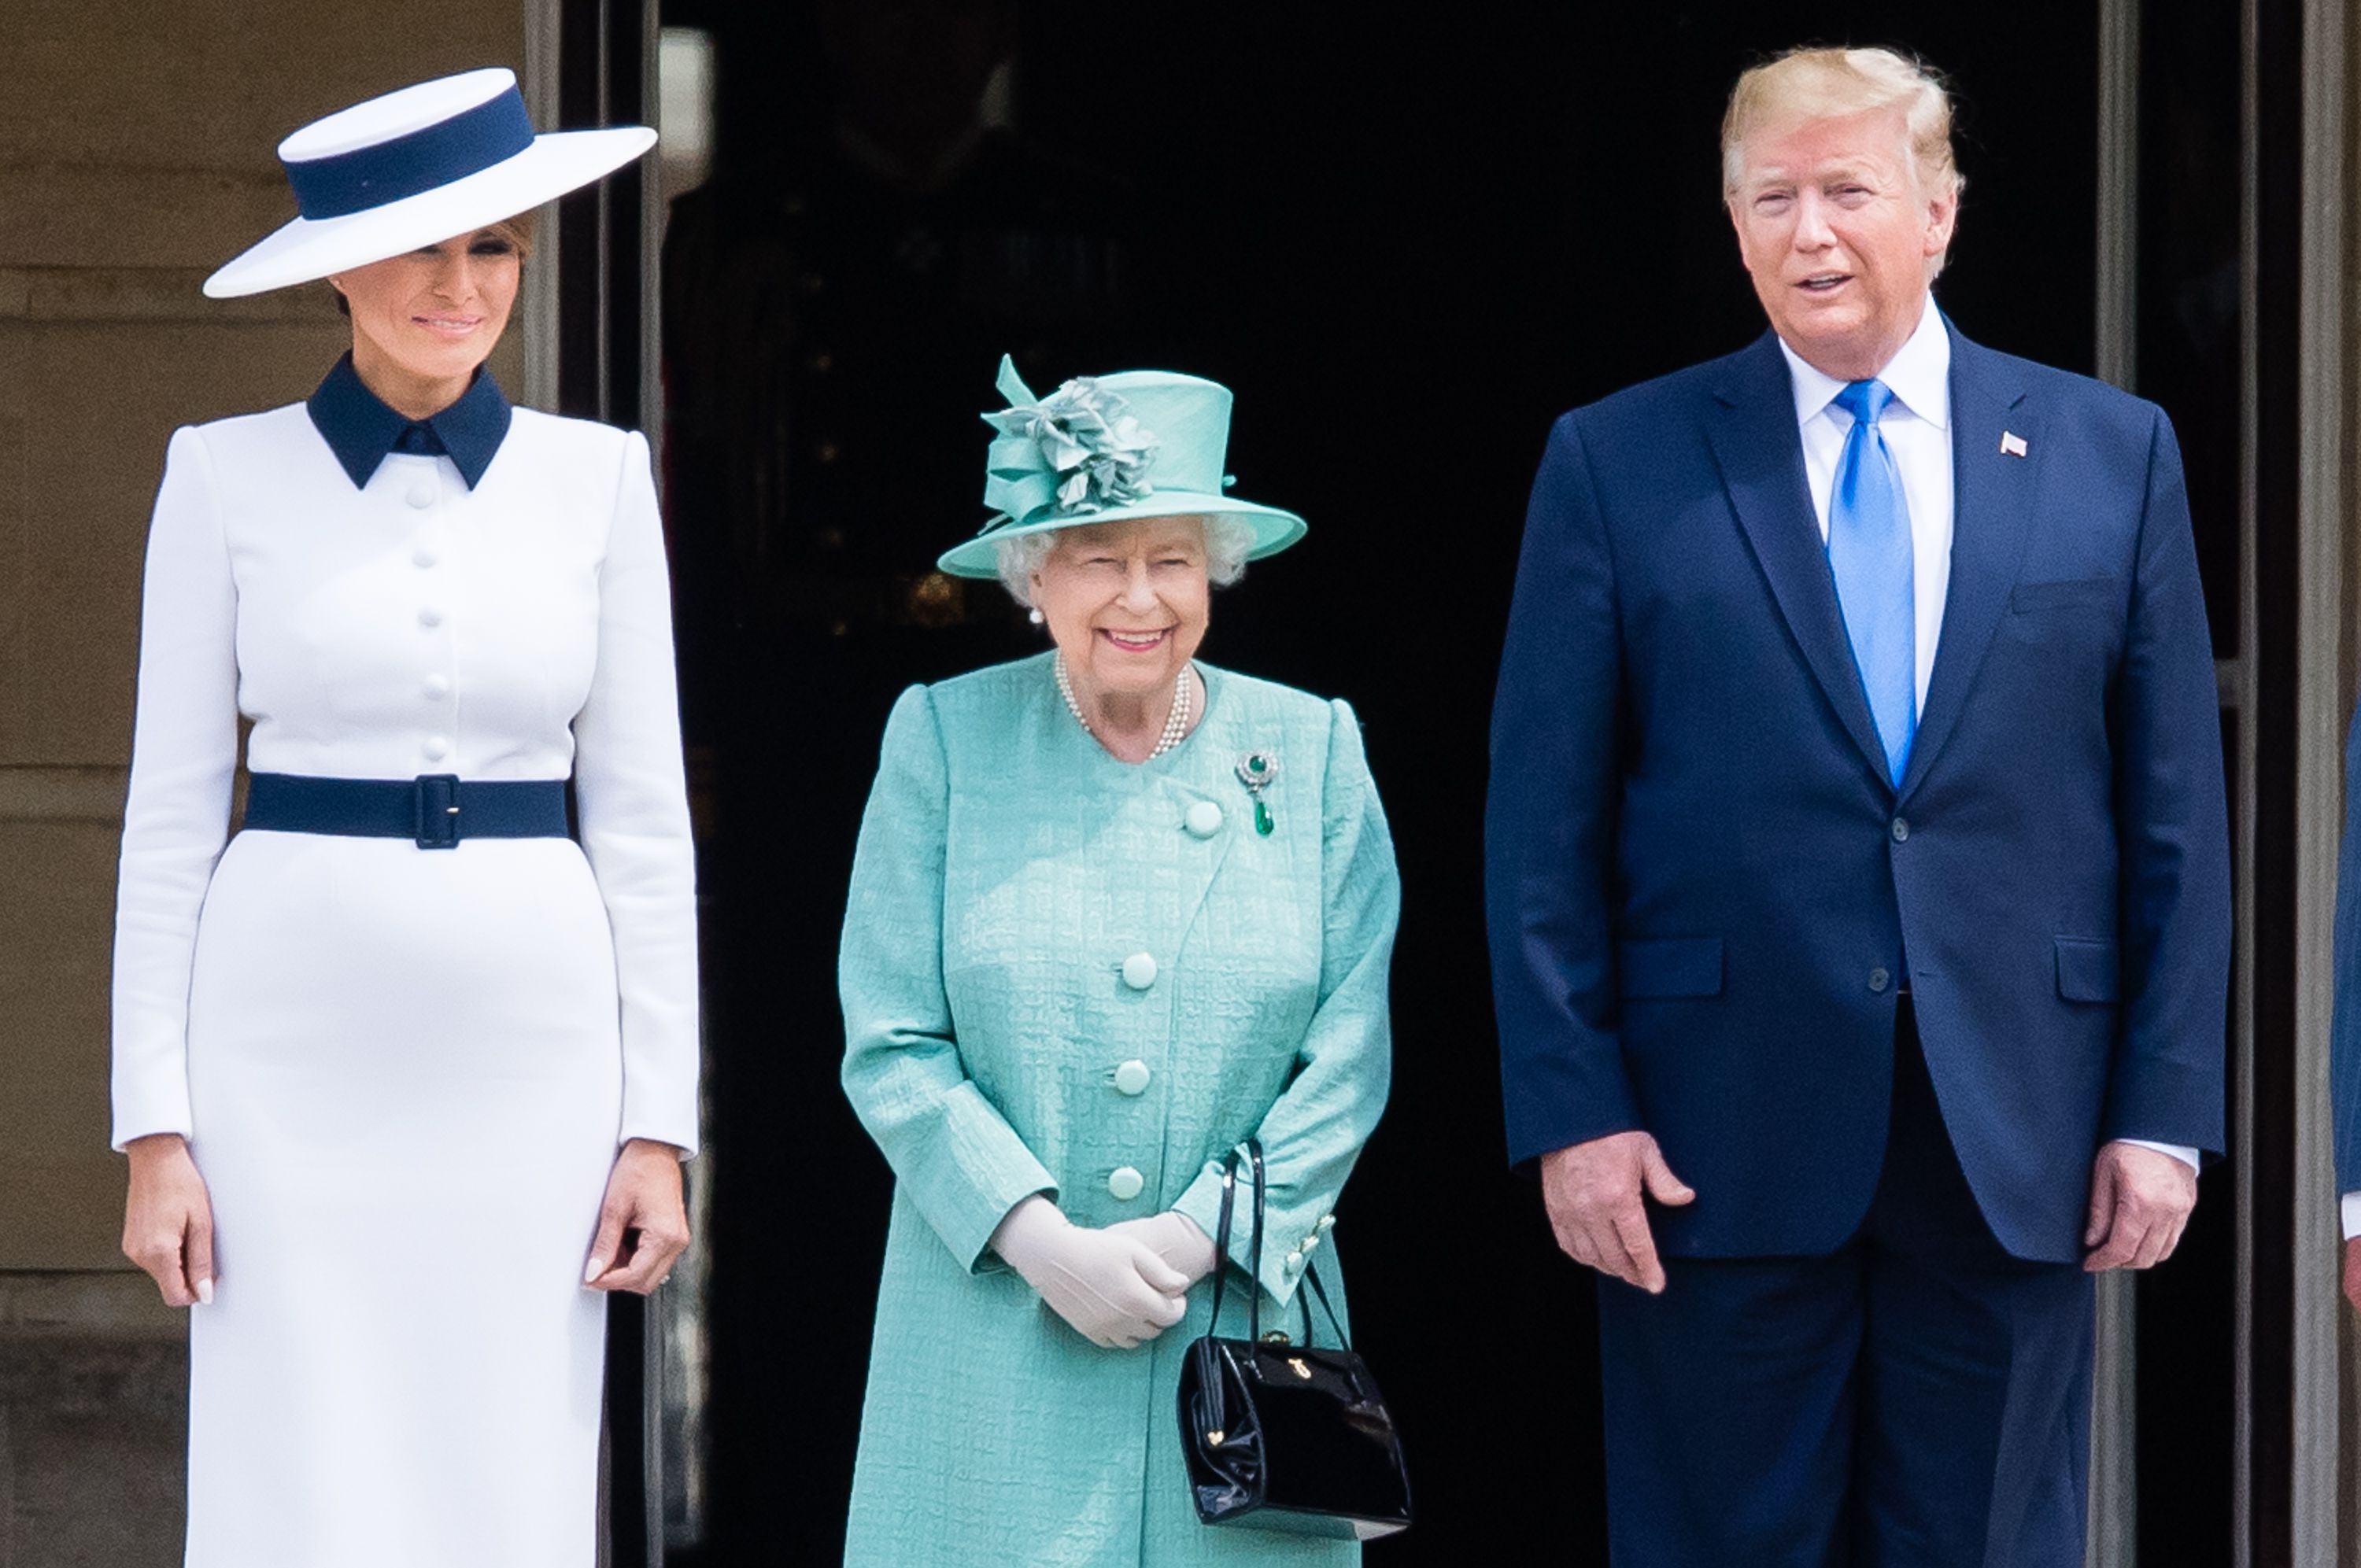 US First Lady Melania Trump, Britain's Queen Elizabeth II and US President Donald Trump pose for a photograph during a ceremonial welcome in the garden of Buckingham Palace on the opening day of a three day state visit to Britain, London, June 3, 2019.